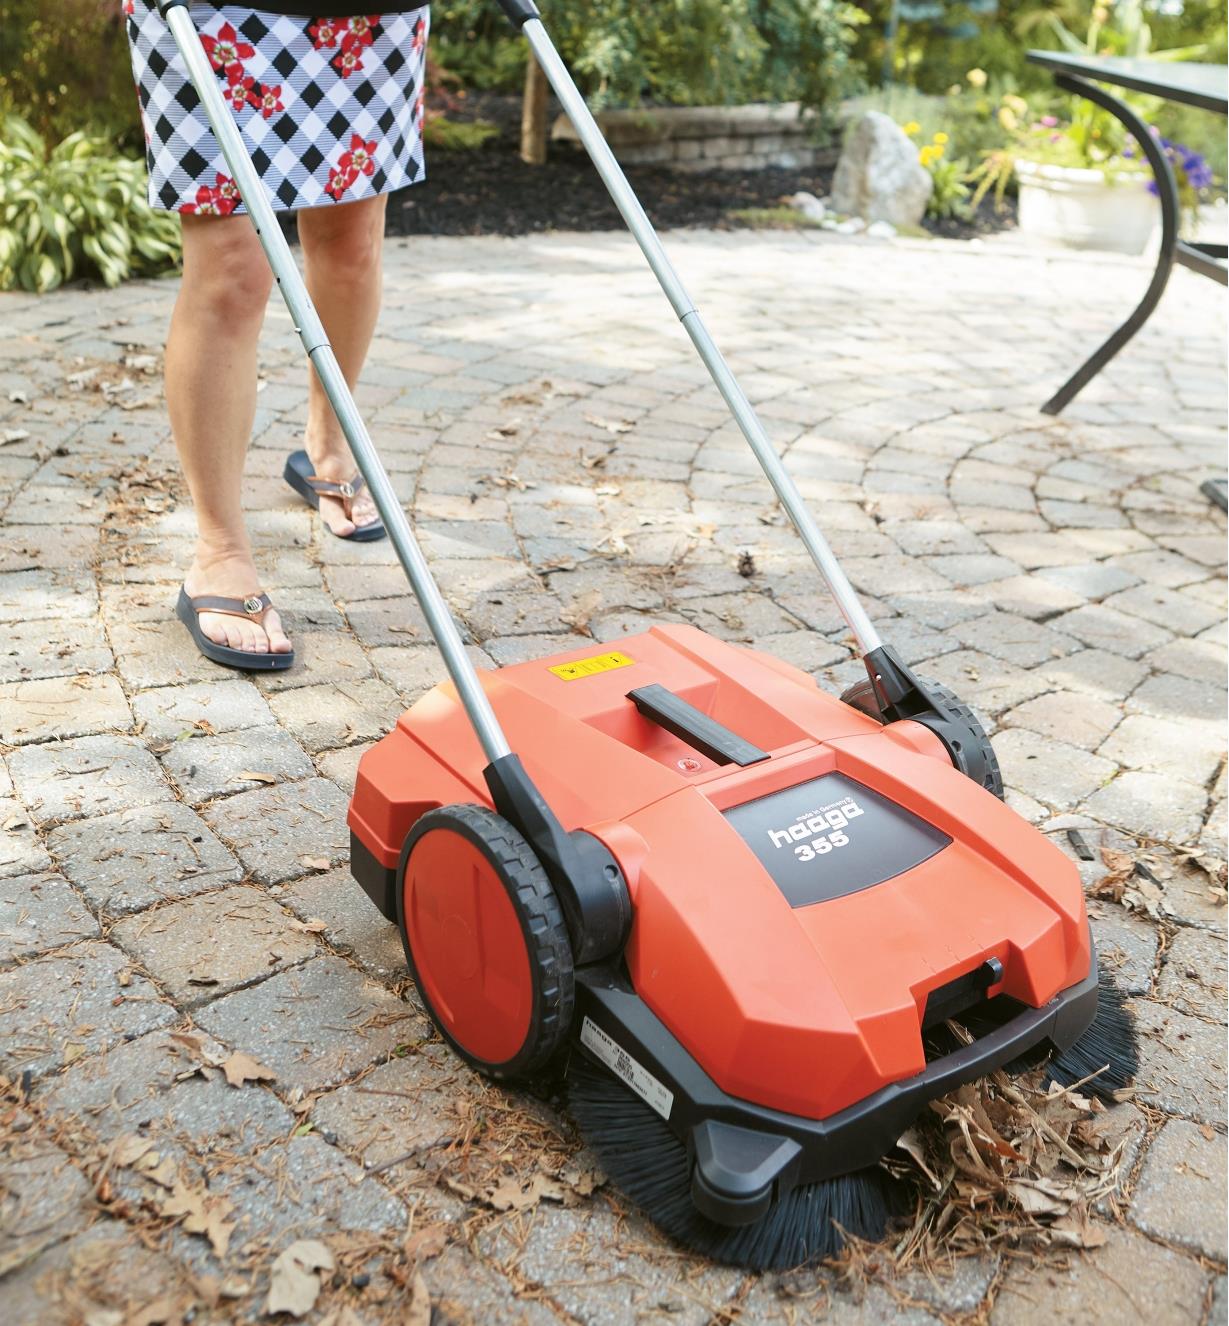 Using the Dual Brush Sweeper to clear debris off a patio